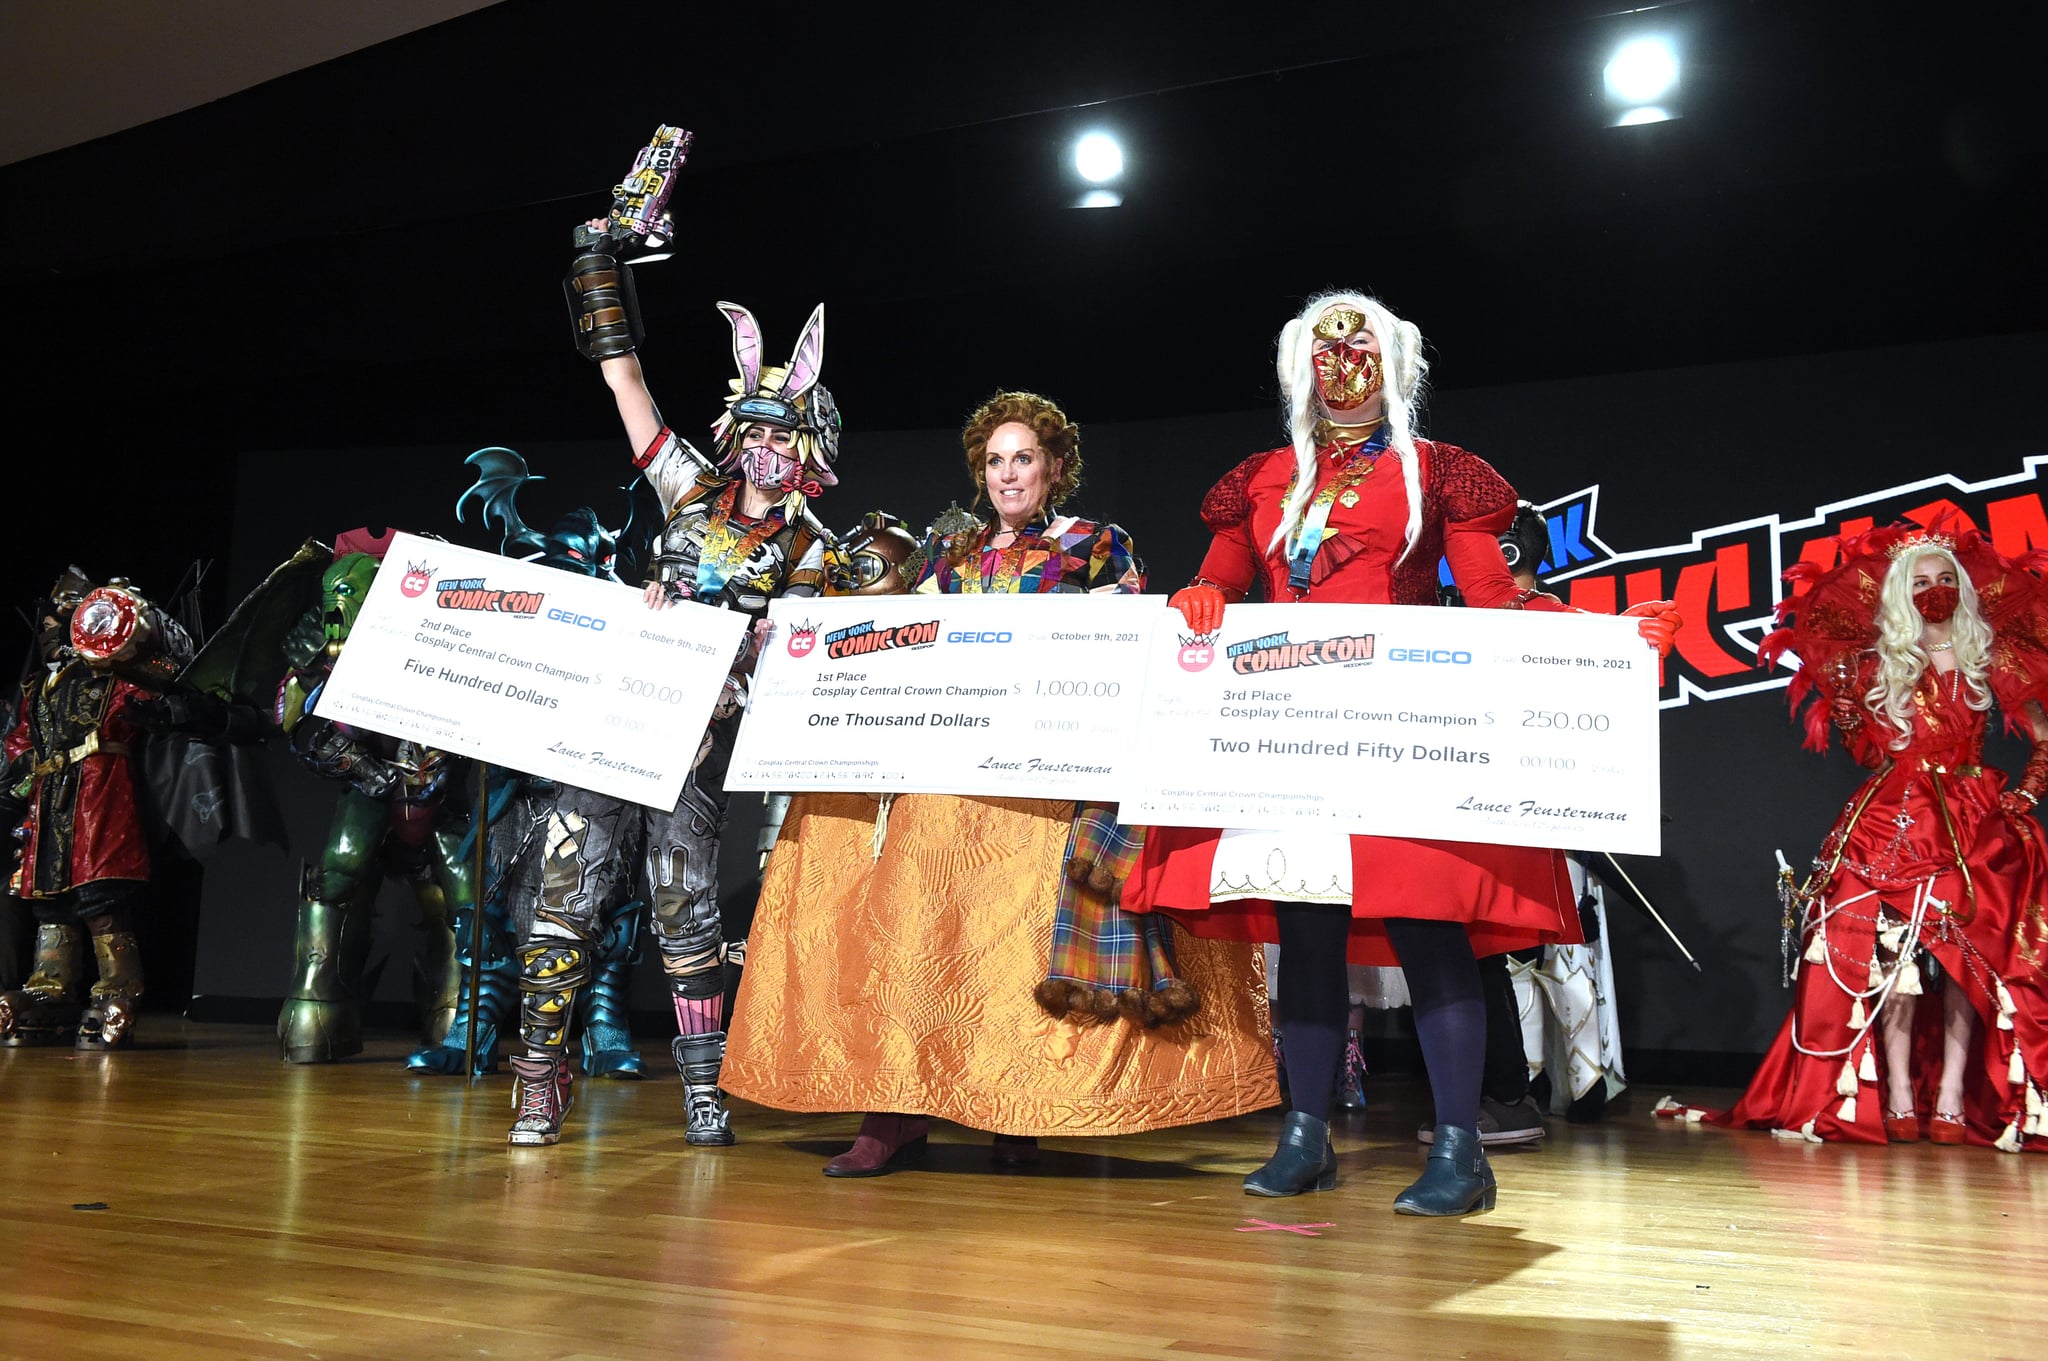 NEW YORK, NEW YORK - OCTOBER 09: Cosplayers pose with their prizes during the Cosplay Central Crown Championships at NYCC during Day 3 of New York Comic Con 2021 at Jacob Javits Center on October 09, 2021 in New York City. (Photo by Bryan Bedder/Getty Images for ReedPop)